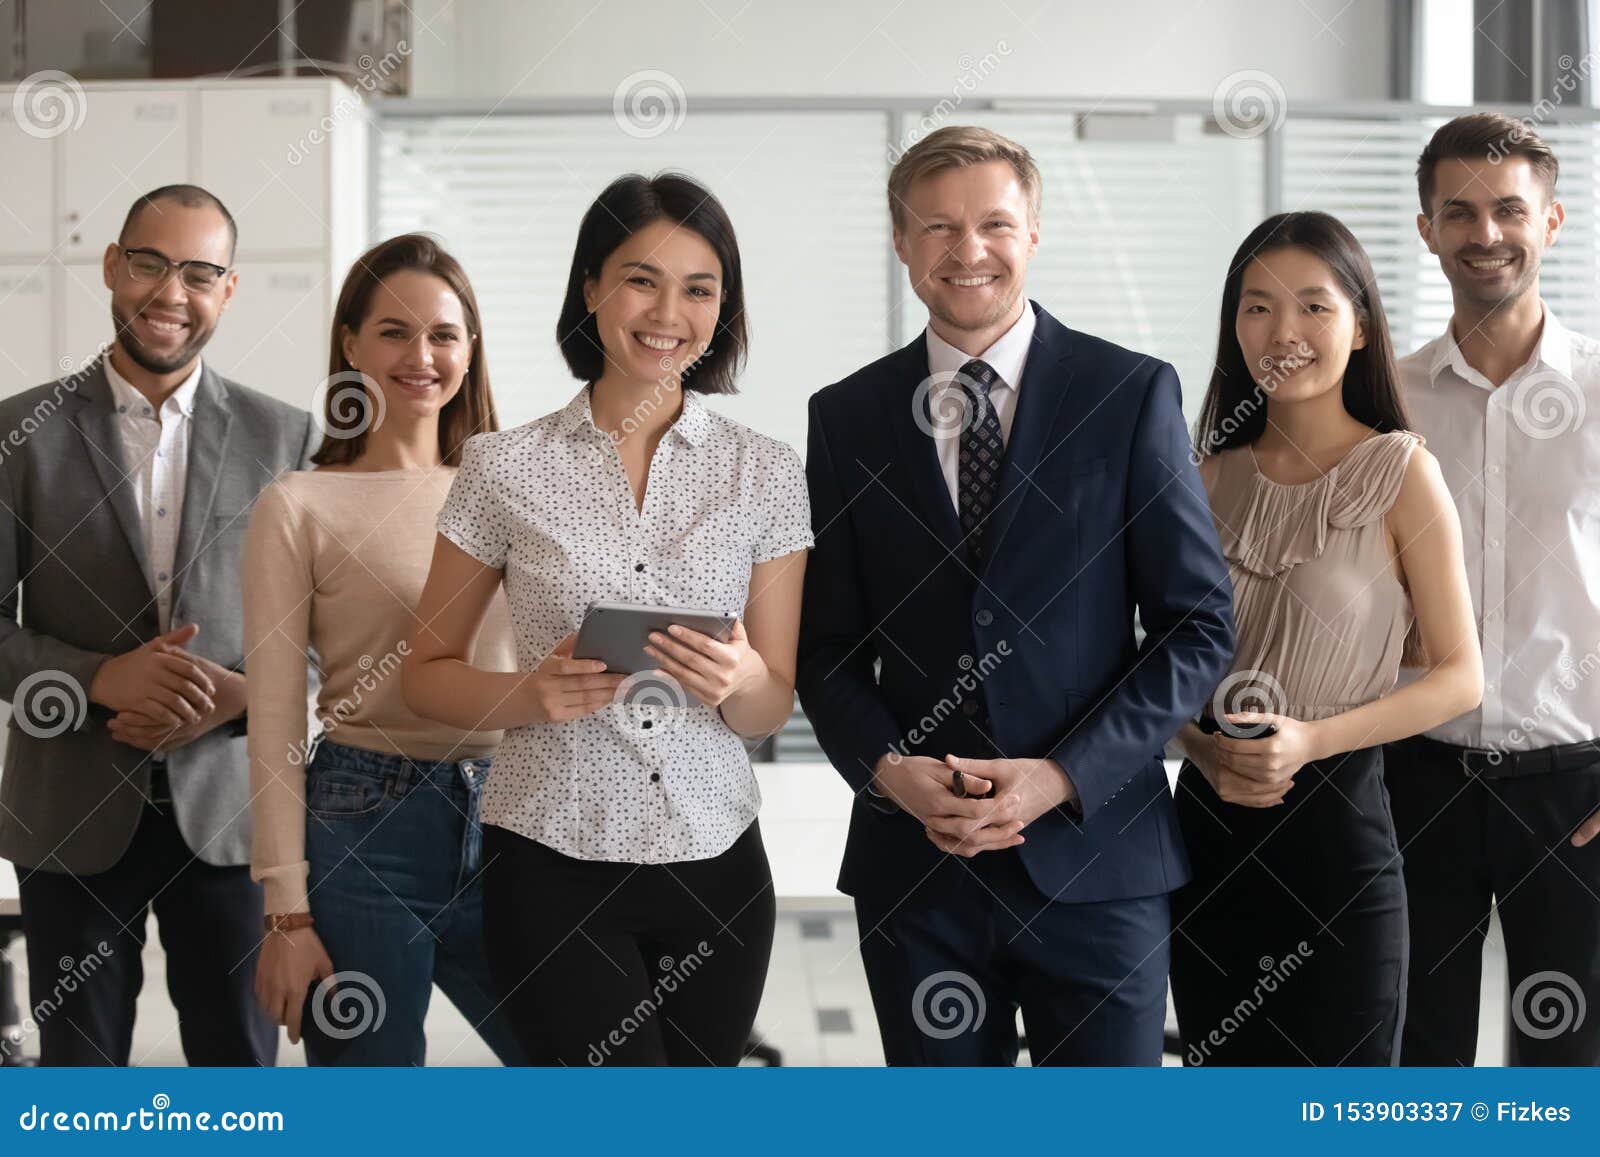 diverse professional business leaders posing with multicultural workers in office